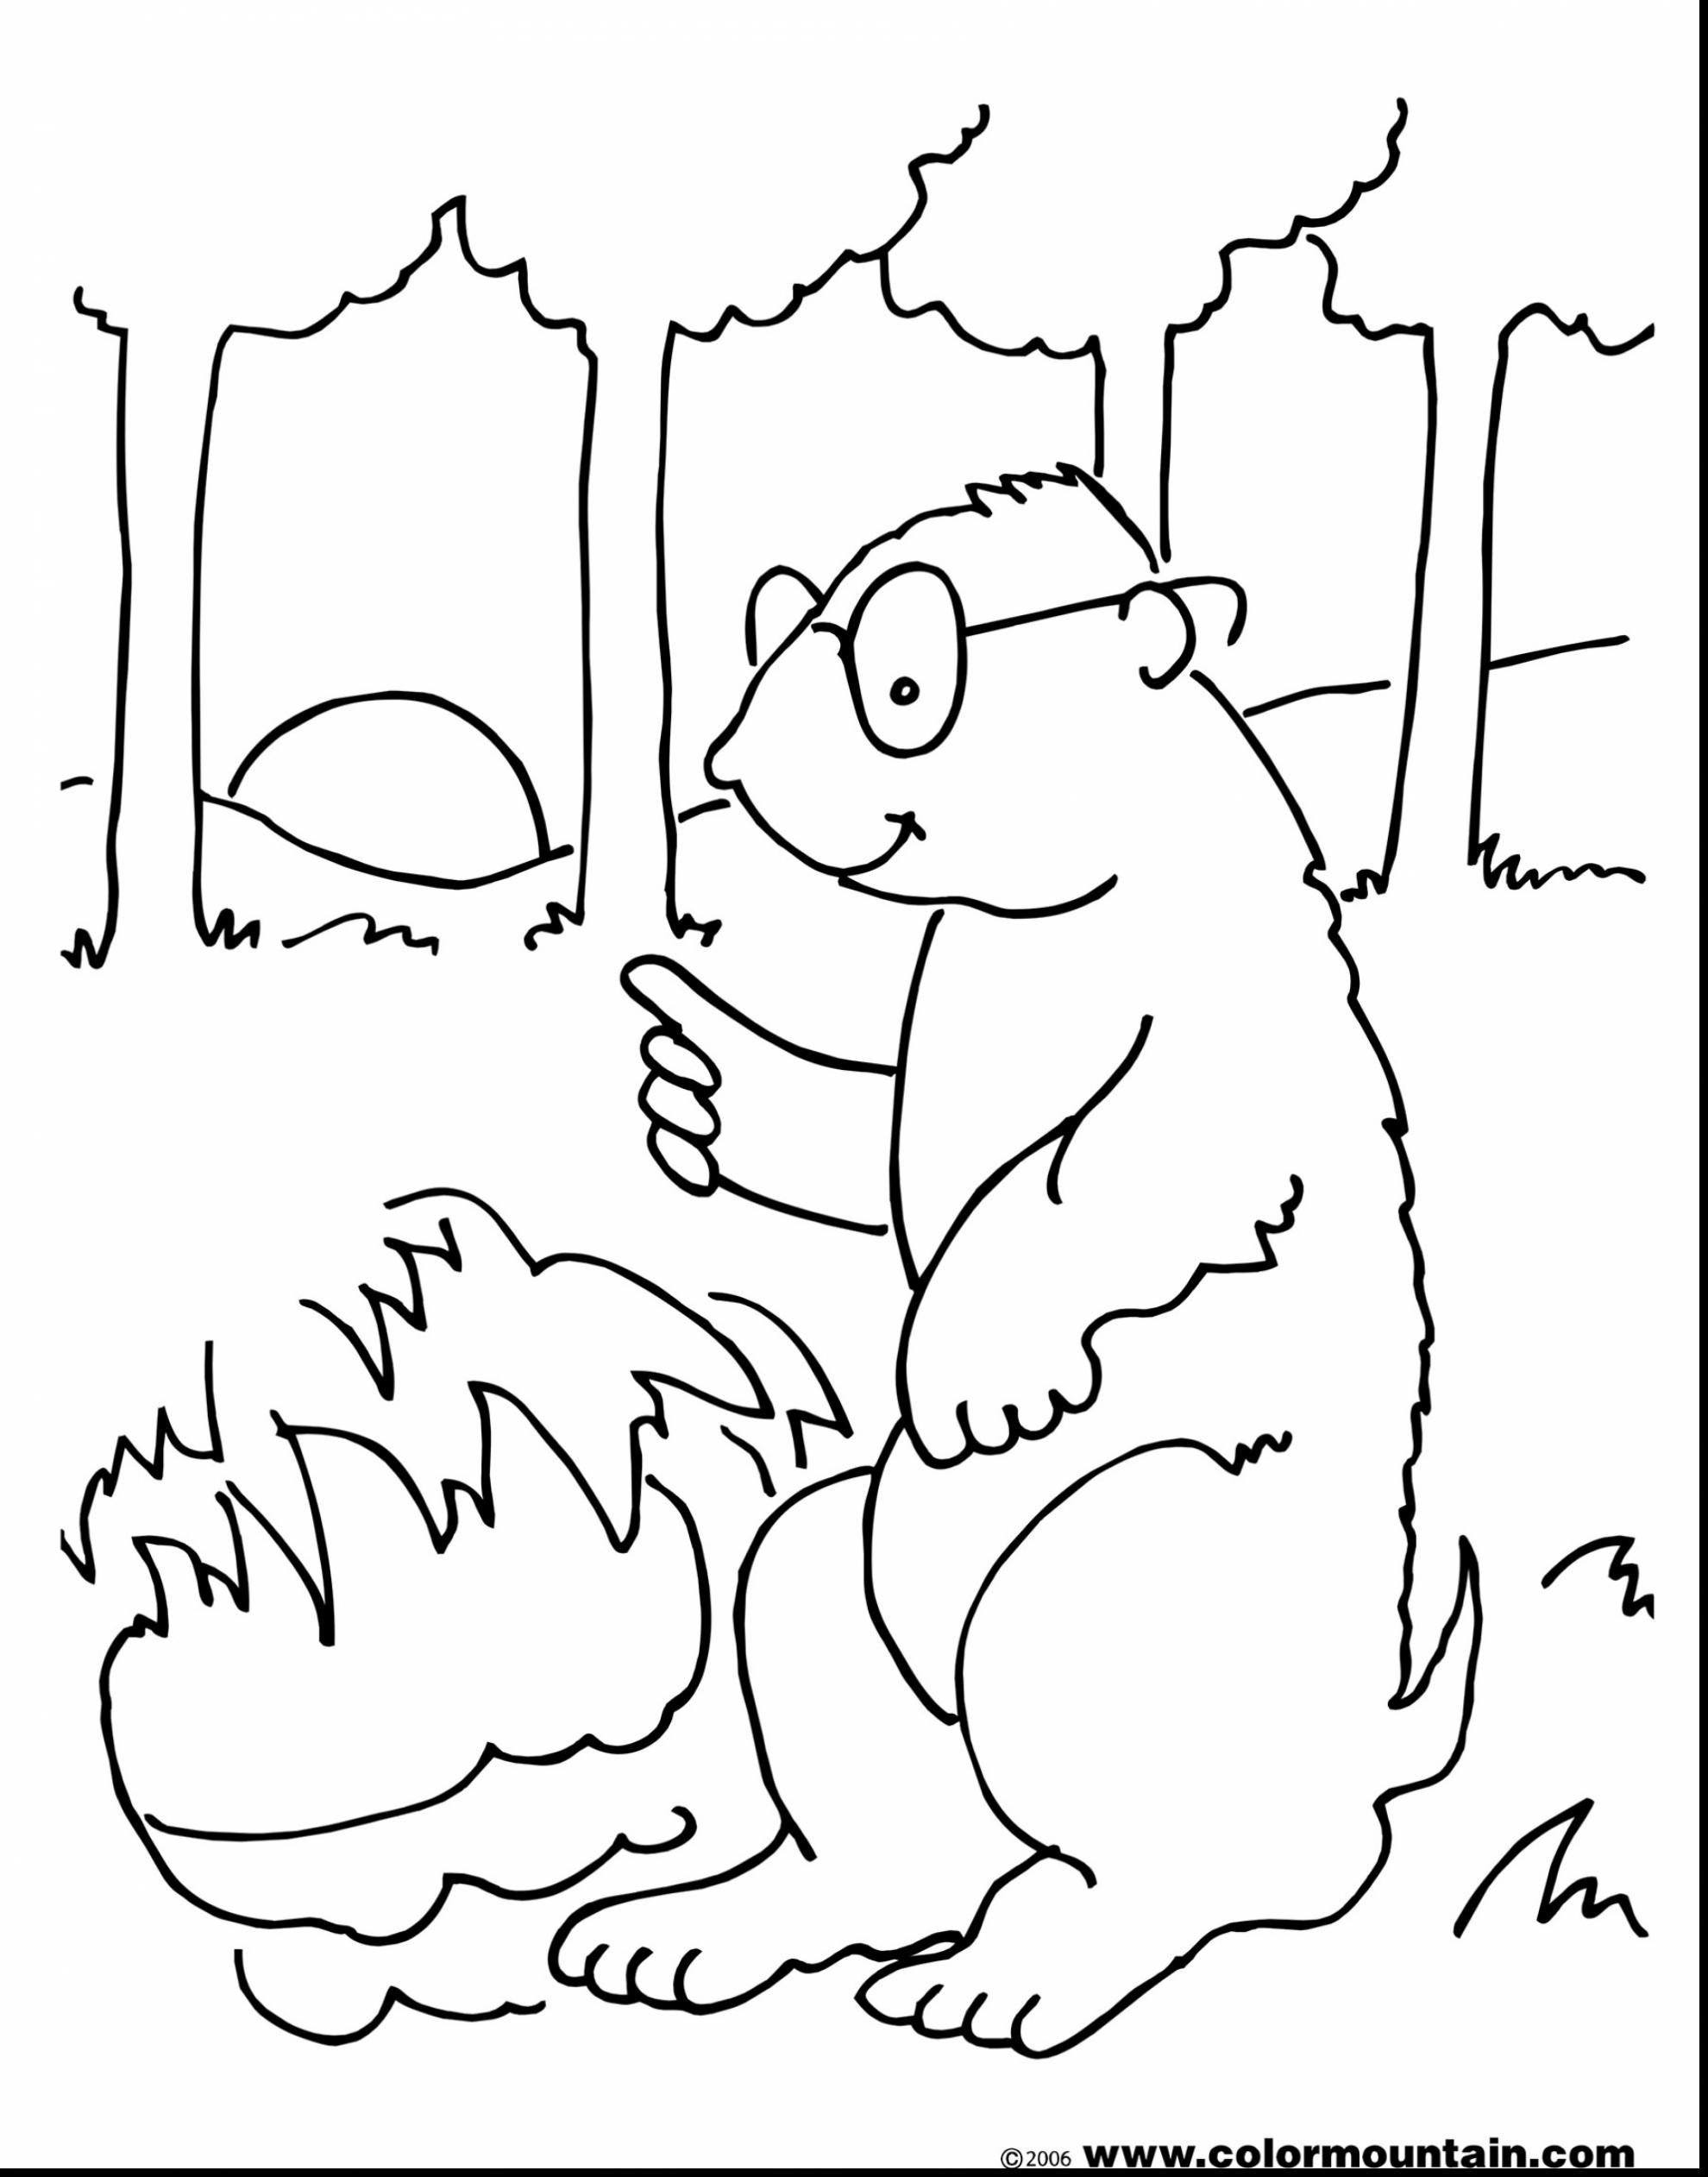 Groundhog Day Coloring Pages at Free printable